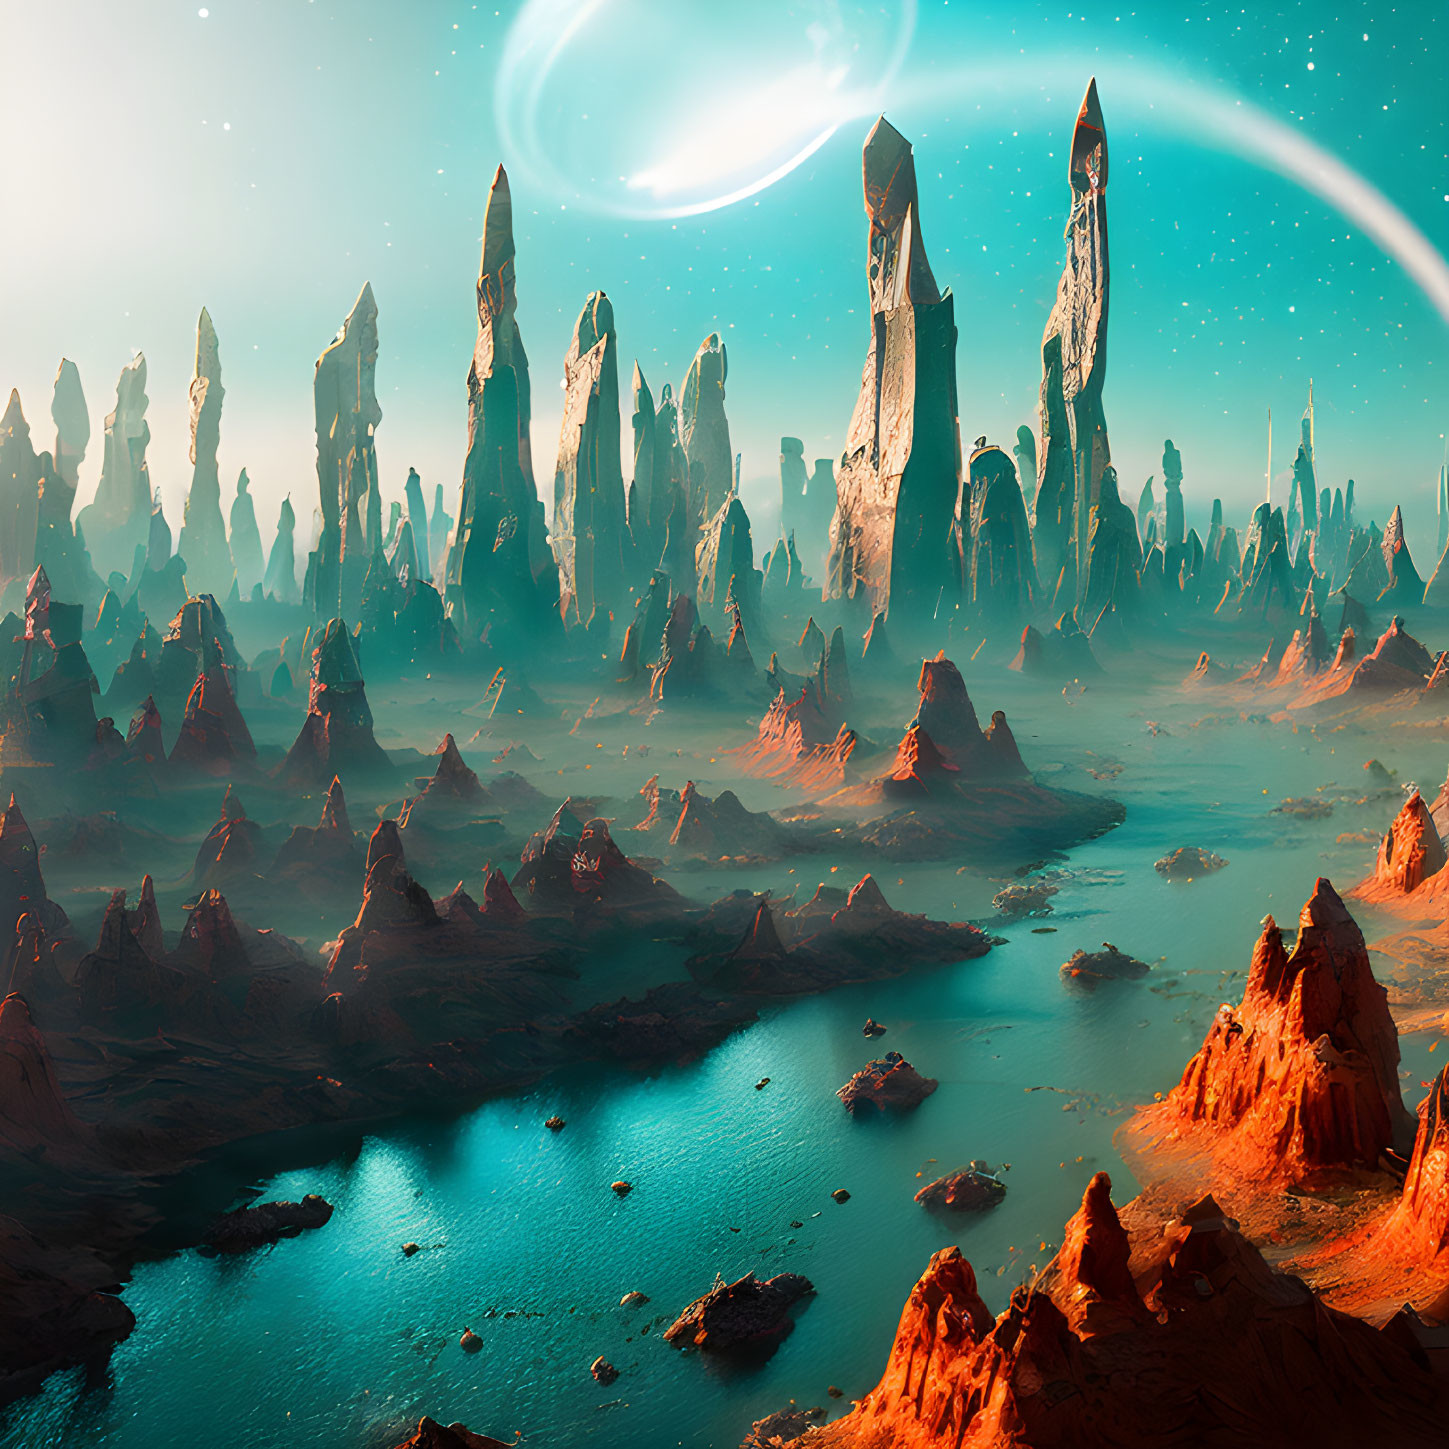 Surreal alien landscape with rock formations, blue lake, and distant planet with rings.